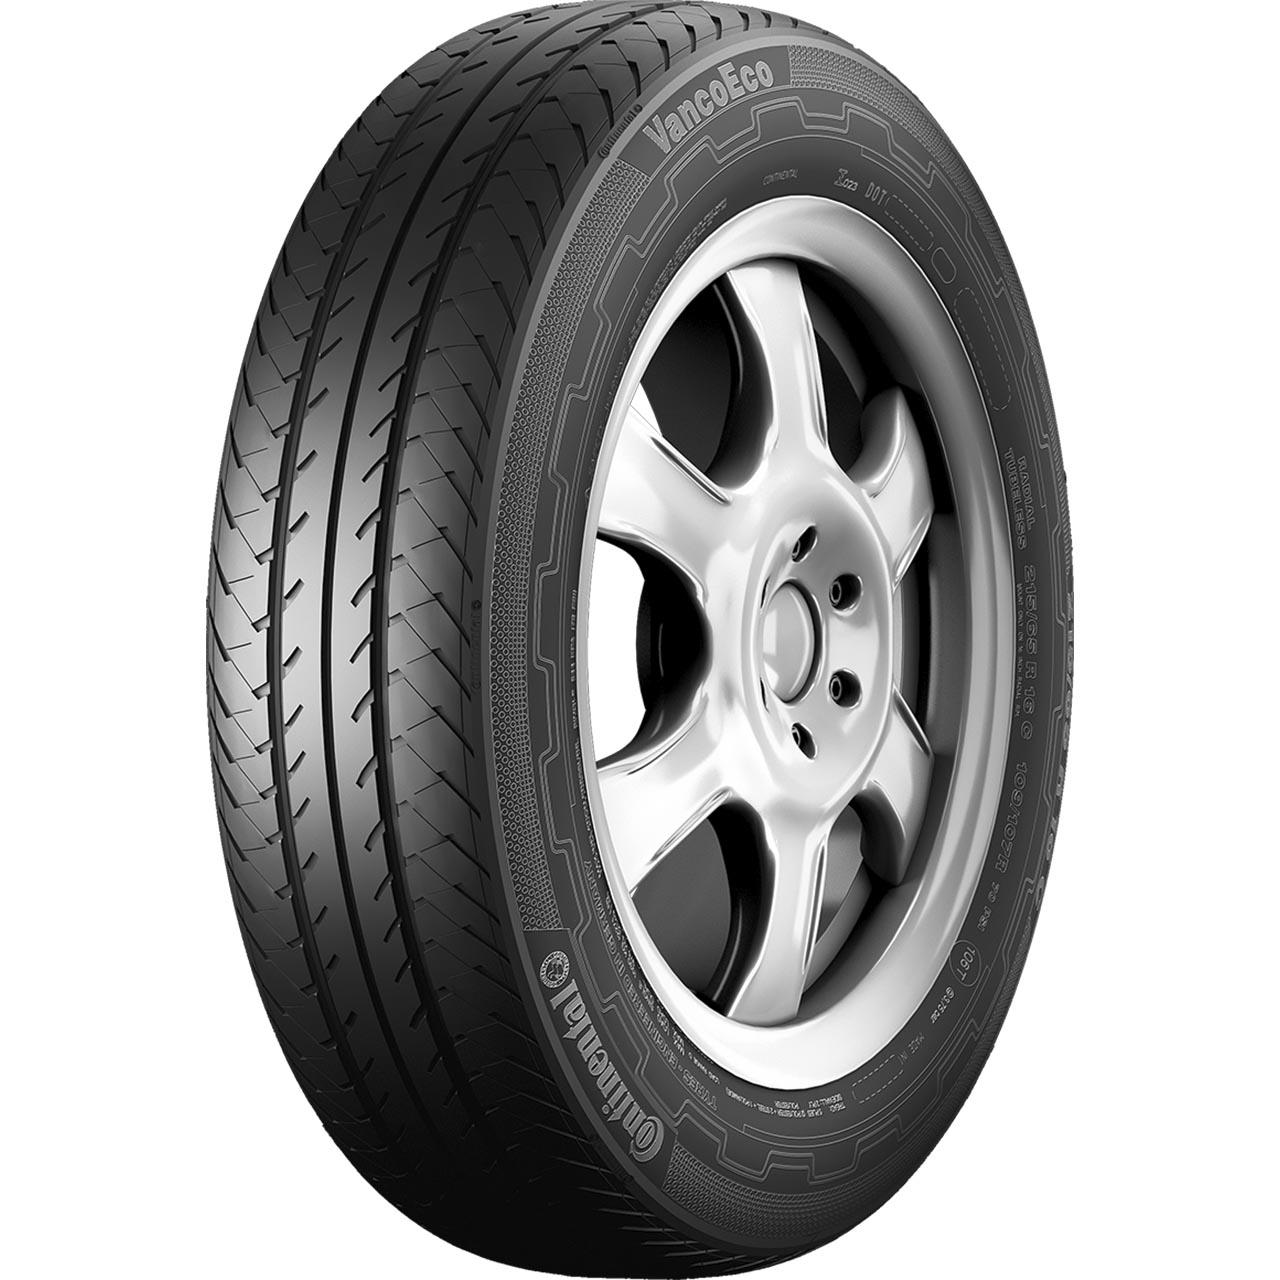 Continental VANCONTACT ECO 235/65R16C 115/113R 8PR FOR